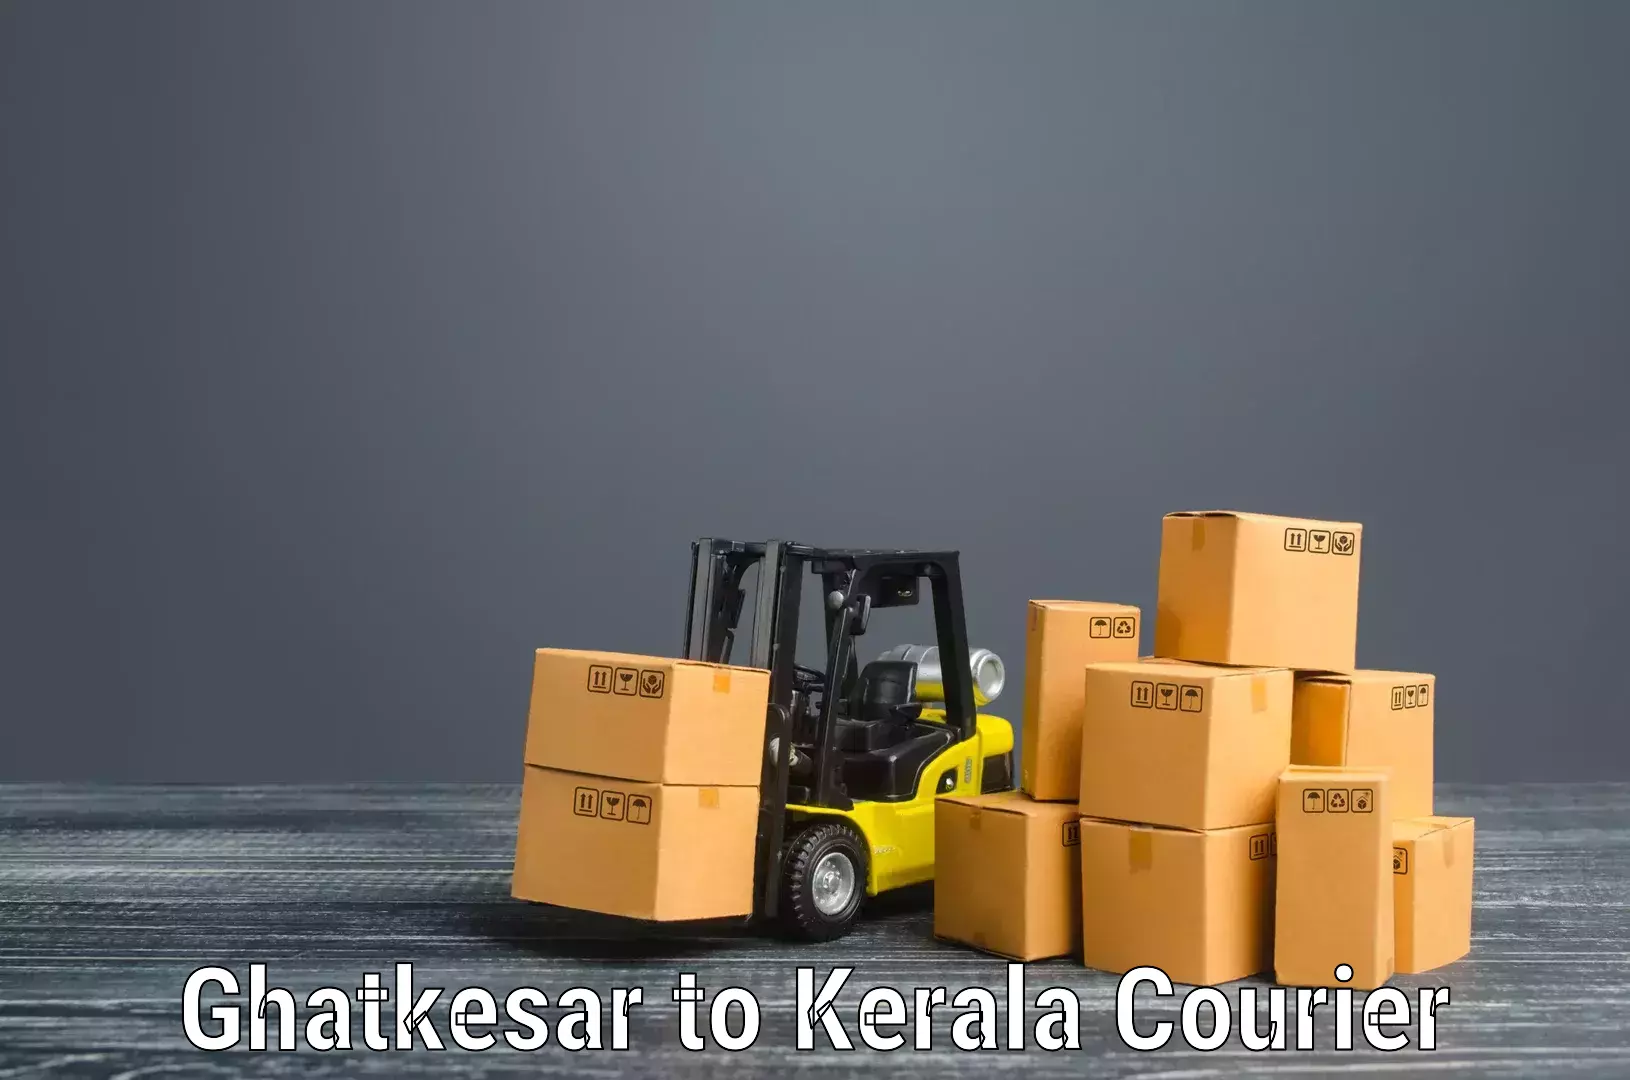 Trusted moving company Ghatkesar to Cochin University of Science and Technology